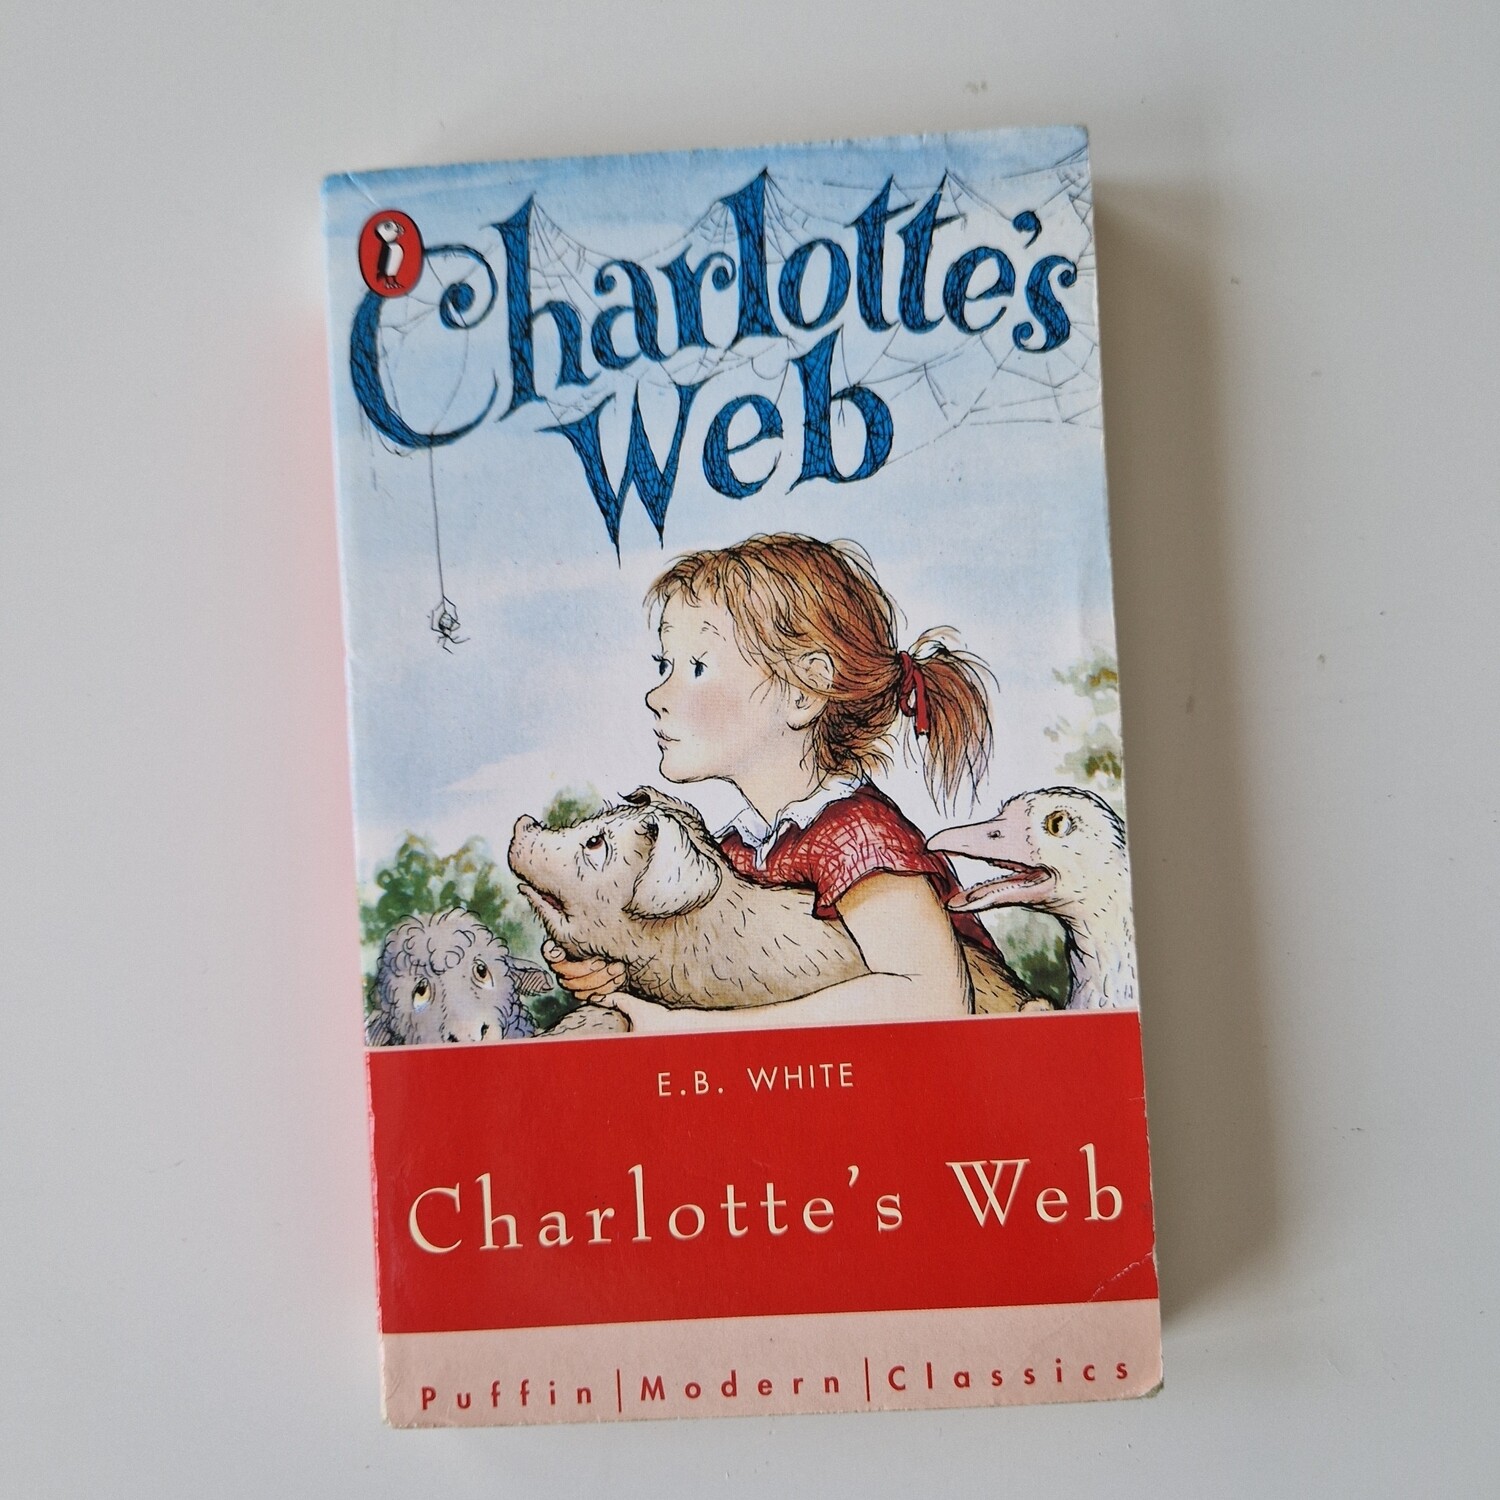 Charlotte's Web Notebook - made from a paperback book